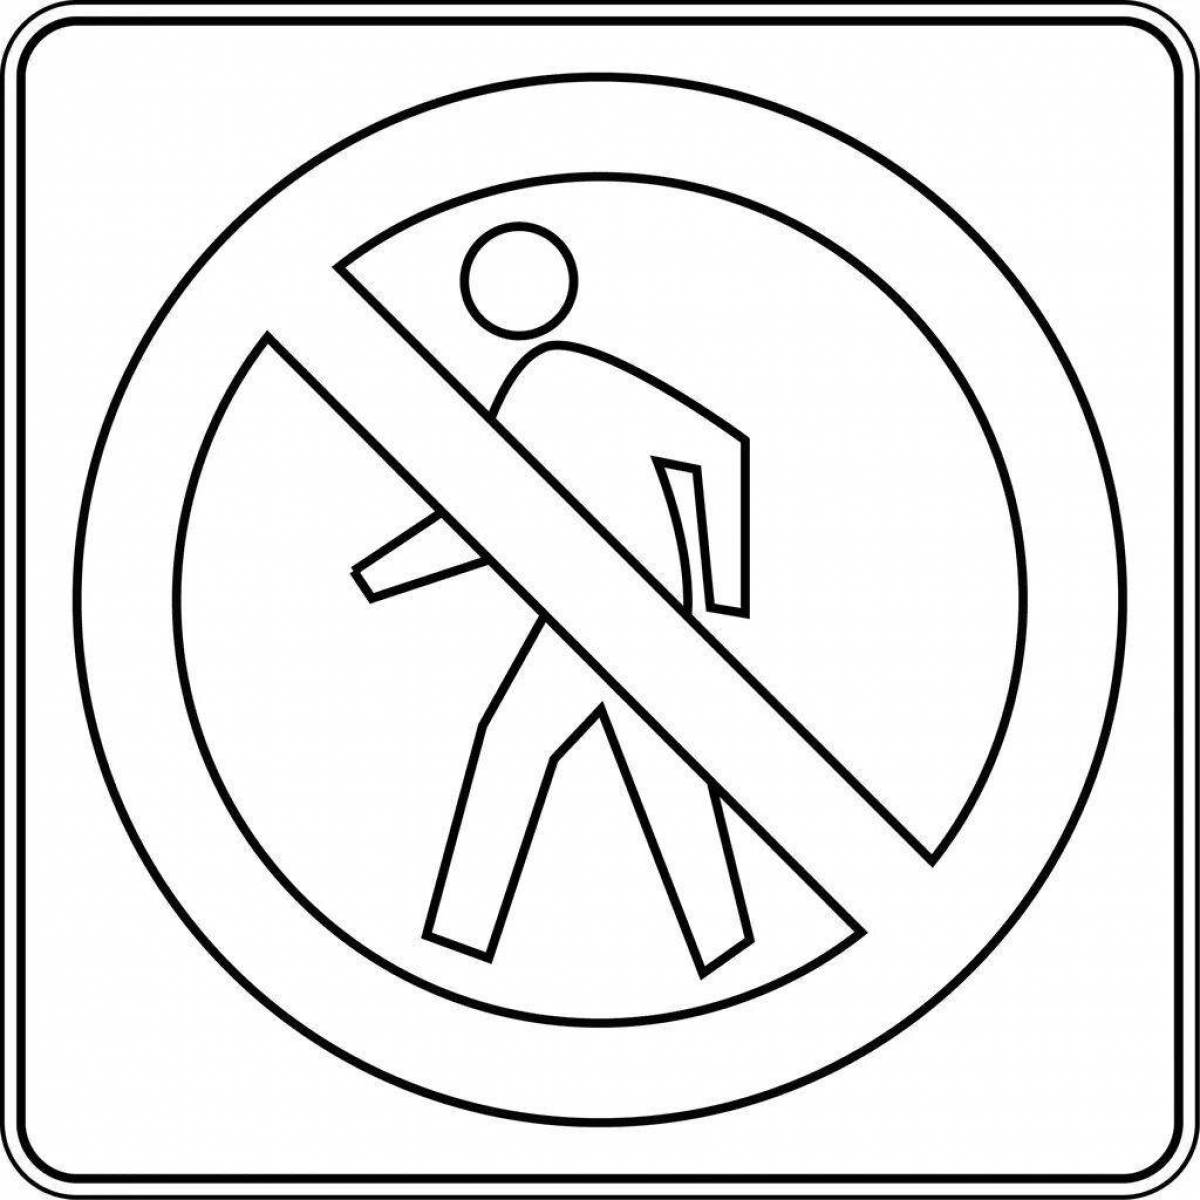 Coloring page bright prohibition road sign